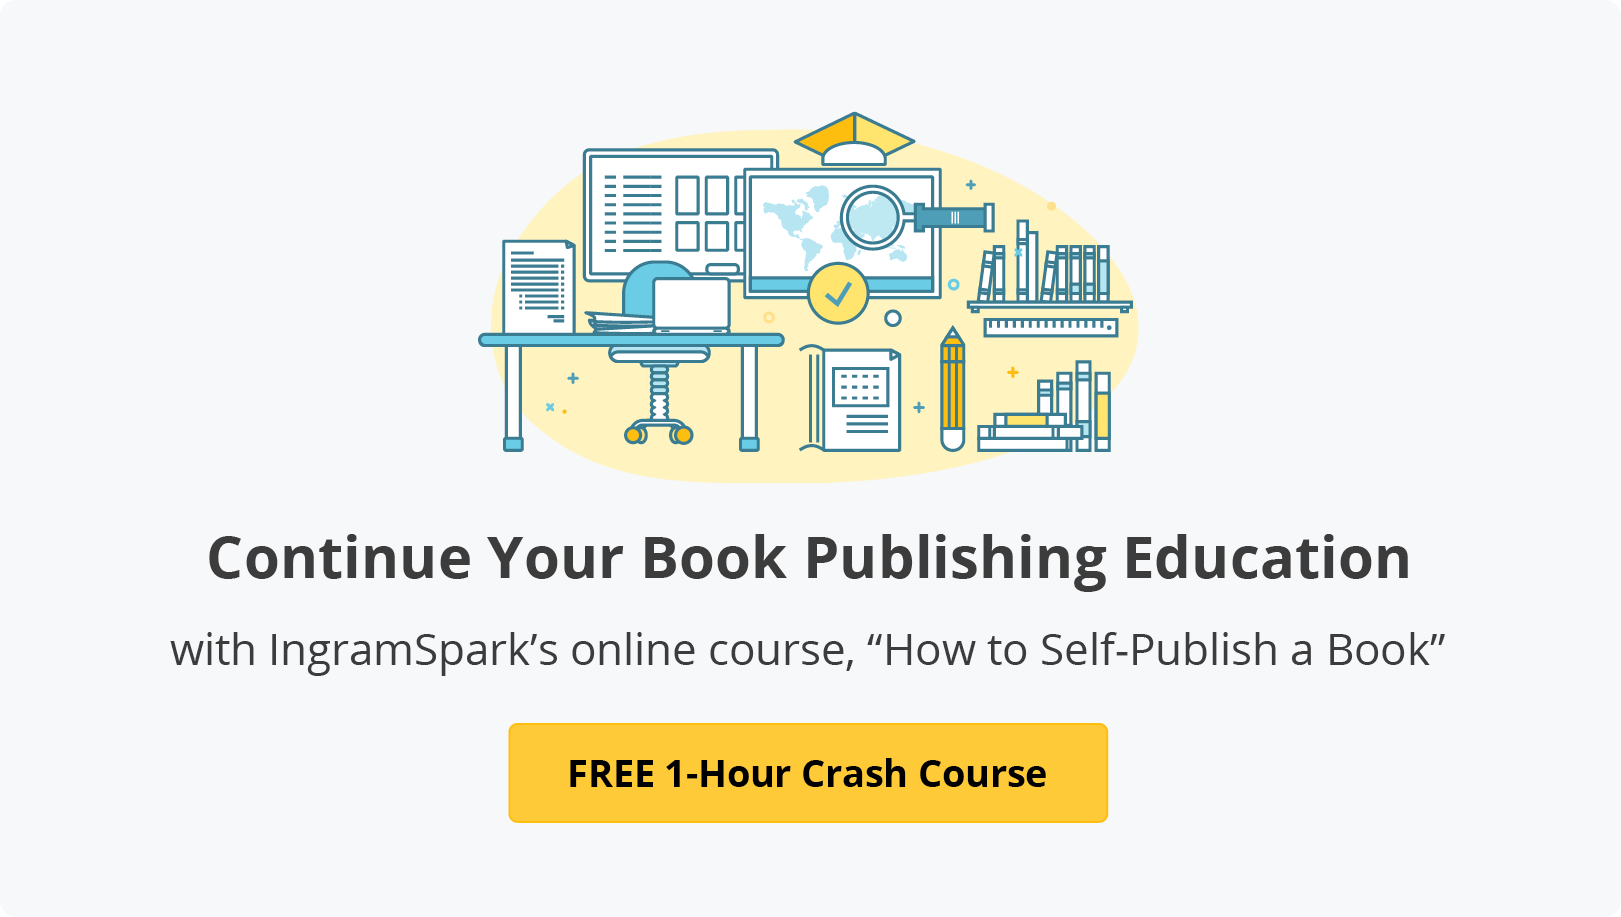 Steps to self publish a book